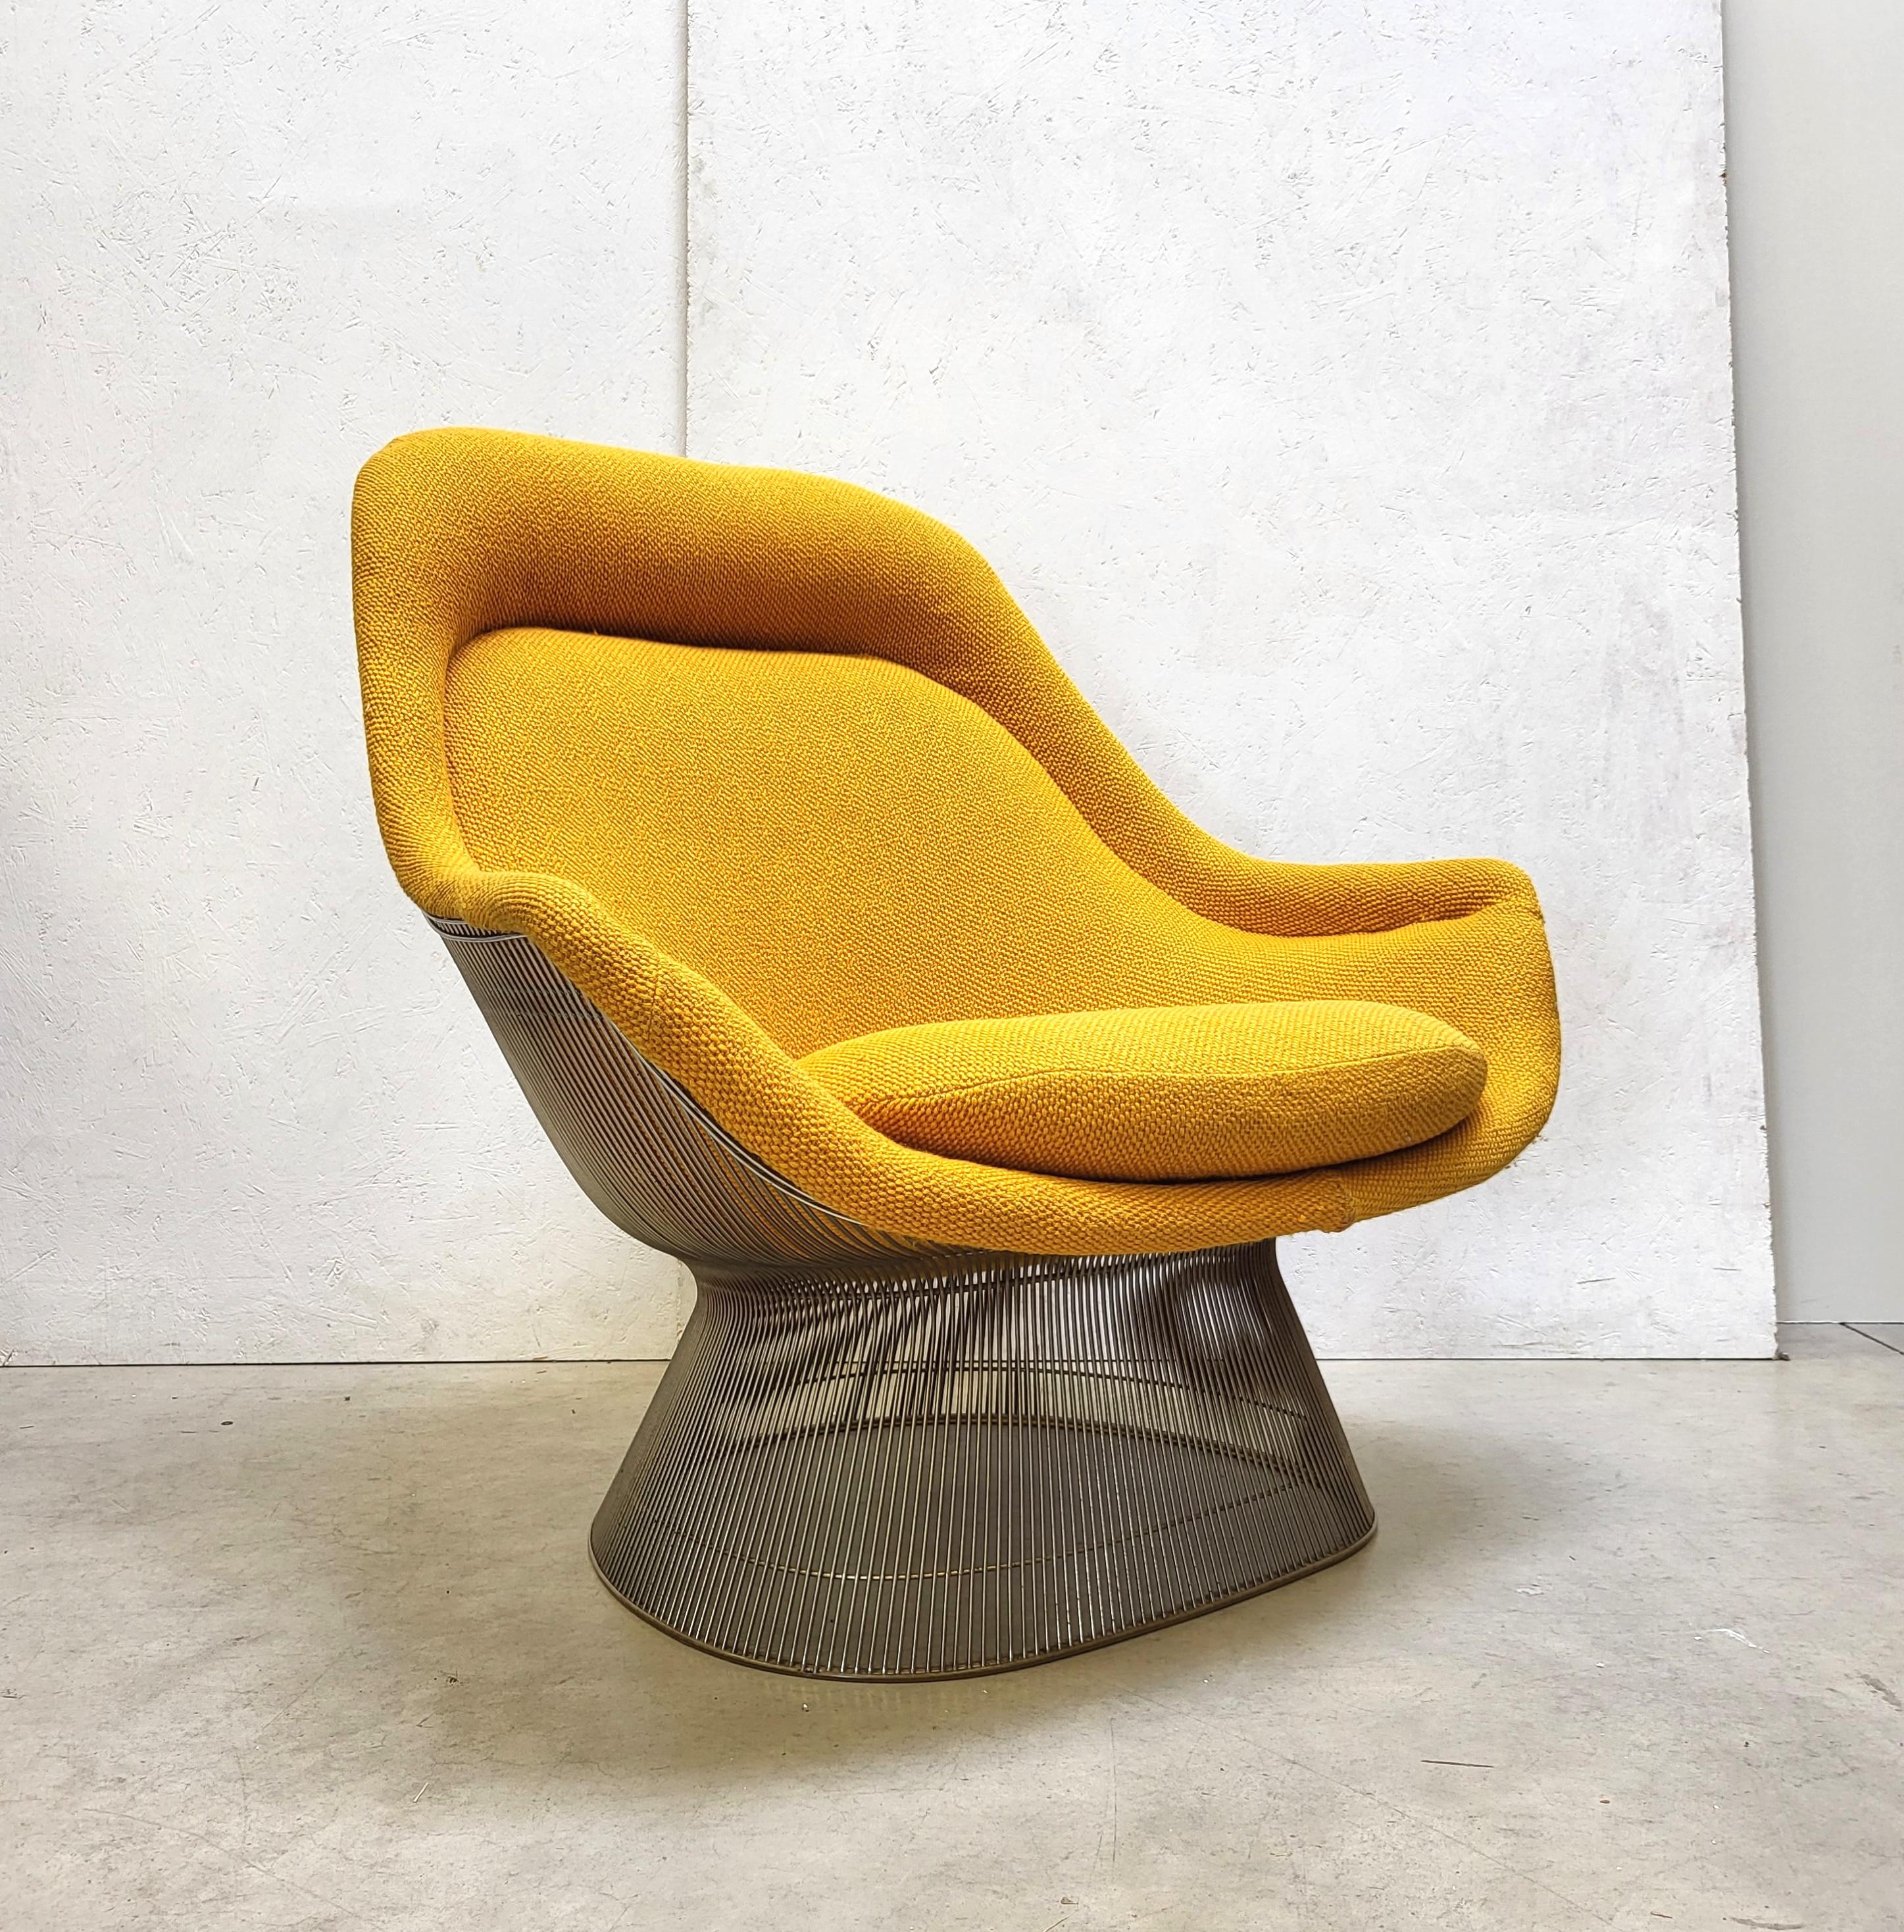 Early 2-tone Cato wool Easy Lounge chair by Warren Platner for Knoll. 

The groundbreaking Easy chair was designed in the 1960s by Warren Platner and produced by Knoll in the early 1980s.
This mid-century classic supports countless positions and